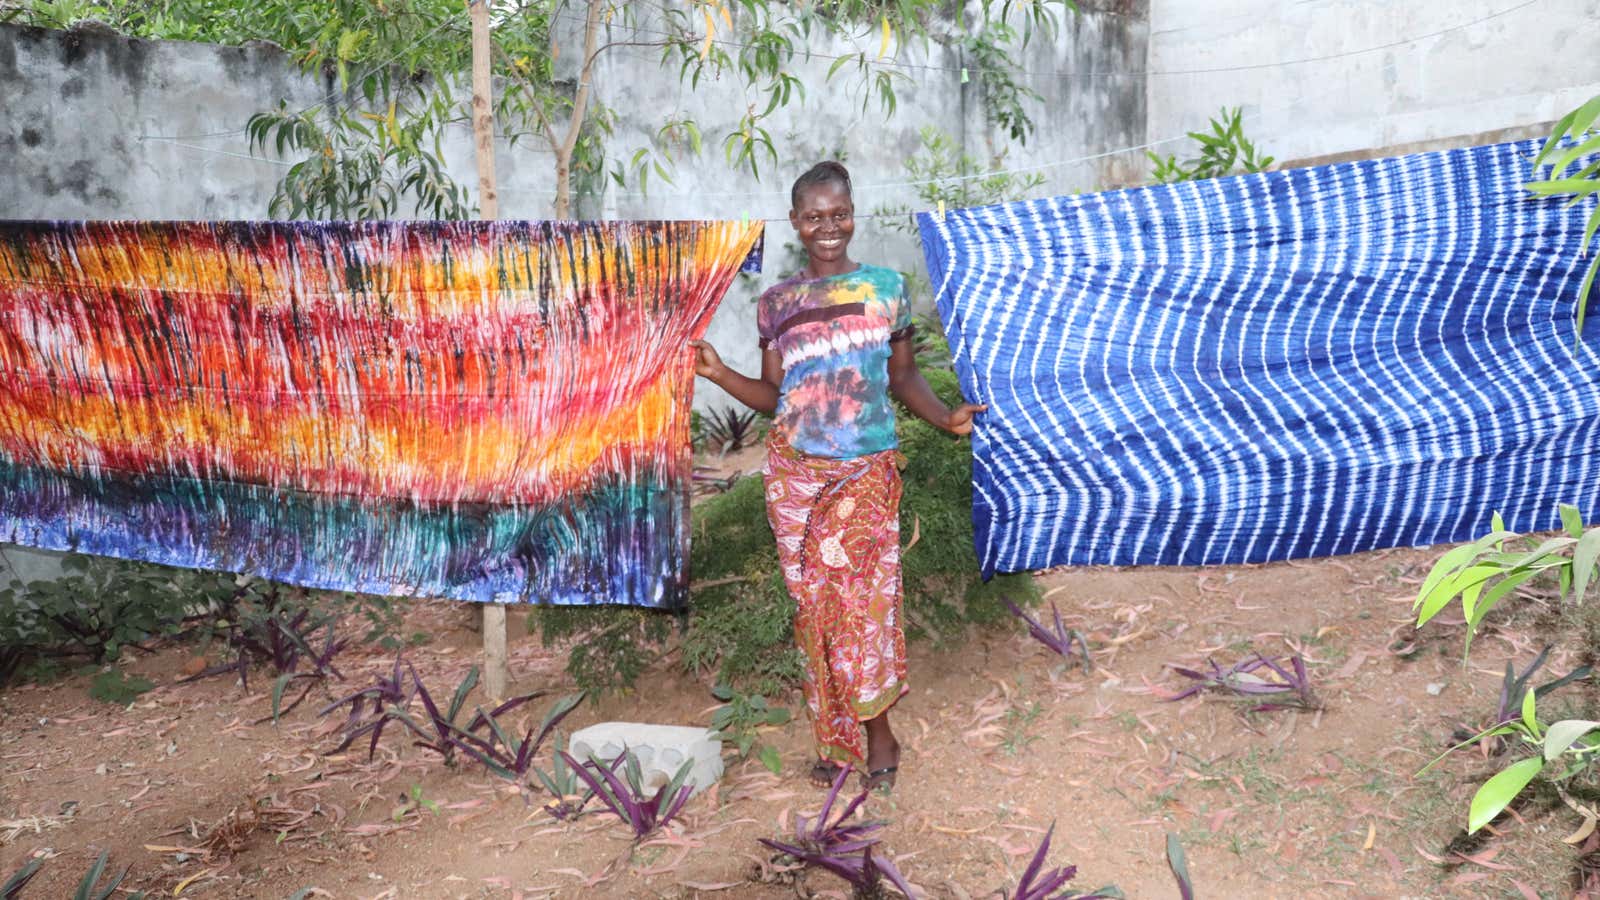 A Sierra Leone clothing design worker poses with tie-dyed fabrics. The country recently passed a law ensuring women can access bank loans.